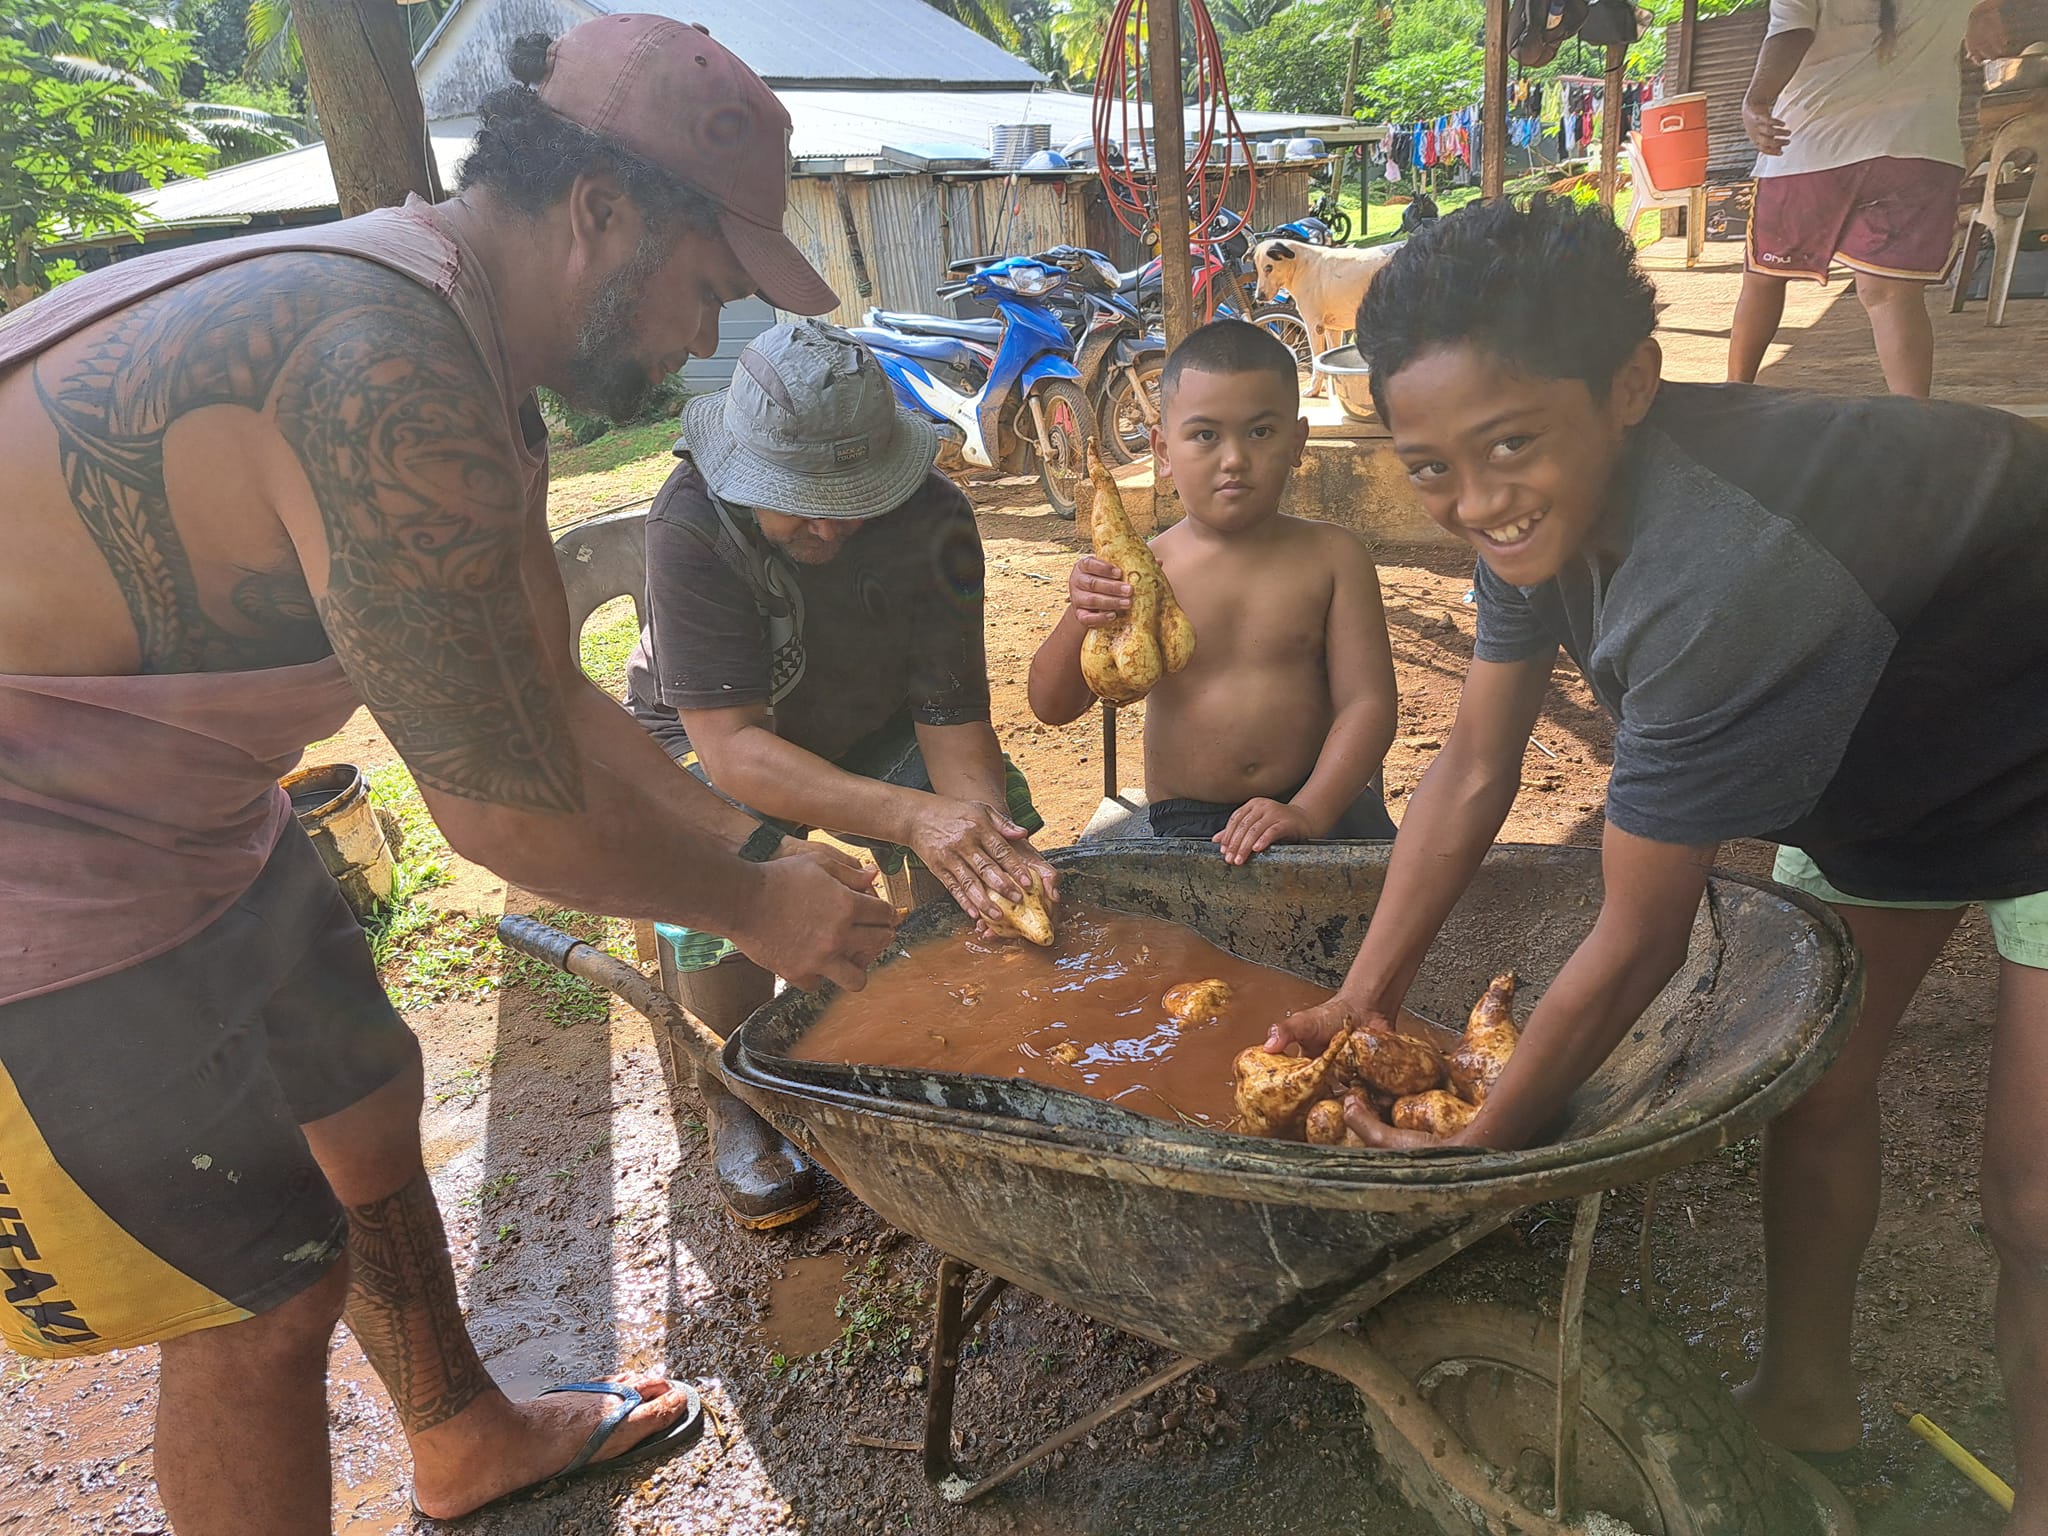 Mangaia triples in size: Island gears up to feed 1000 visitors for Bicentennial Celebration